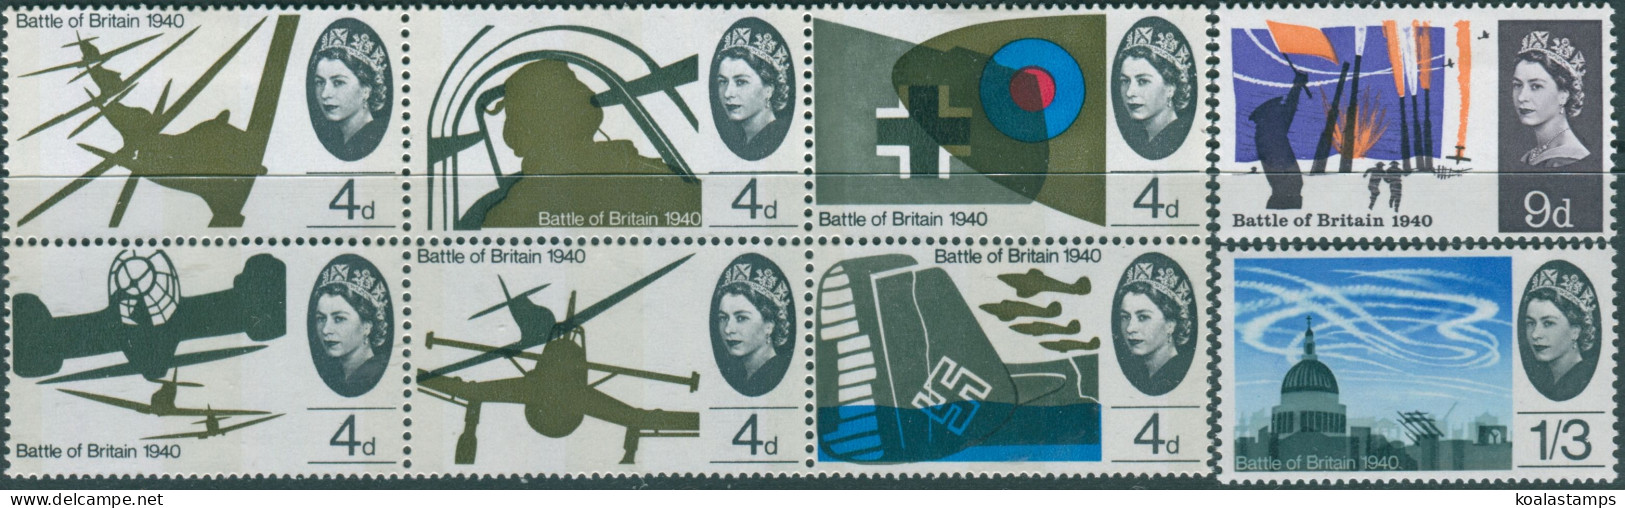 Great Britain 1965 SG671-678 QEII Battle Of Britain Set MNH - Unclassified